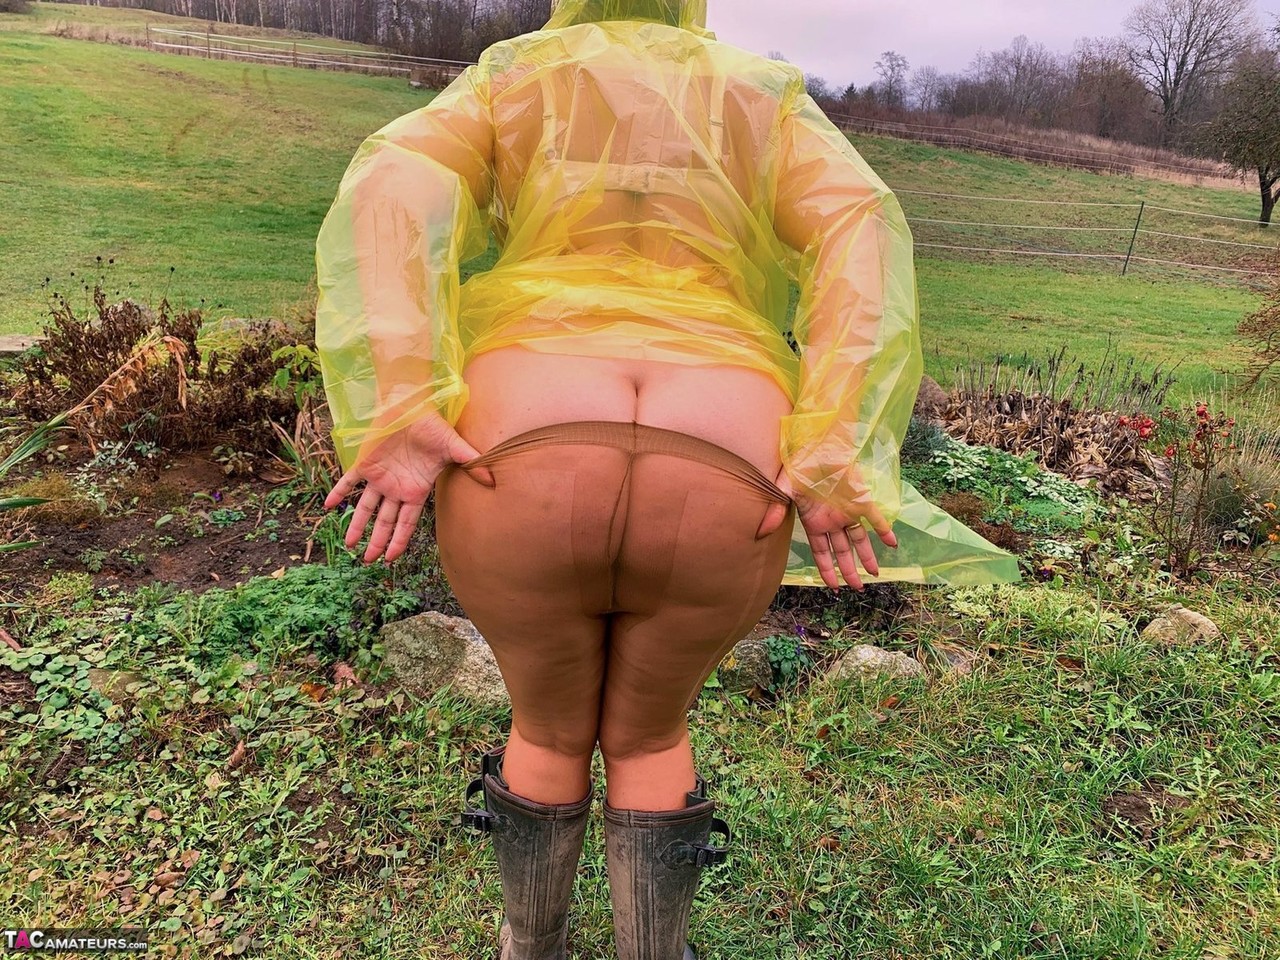 Overweight amateur Sweet Susi shows her naked body while wearing rubber boots foto pornográfica #424944077 | TAC Amateurs Pics, Sweet Susi, BBW, pornografia móvel